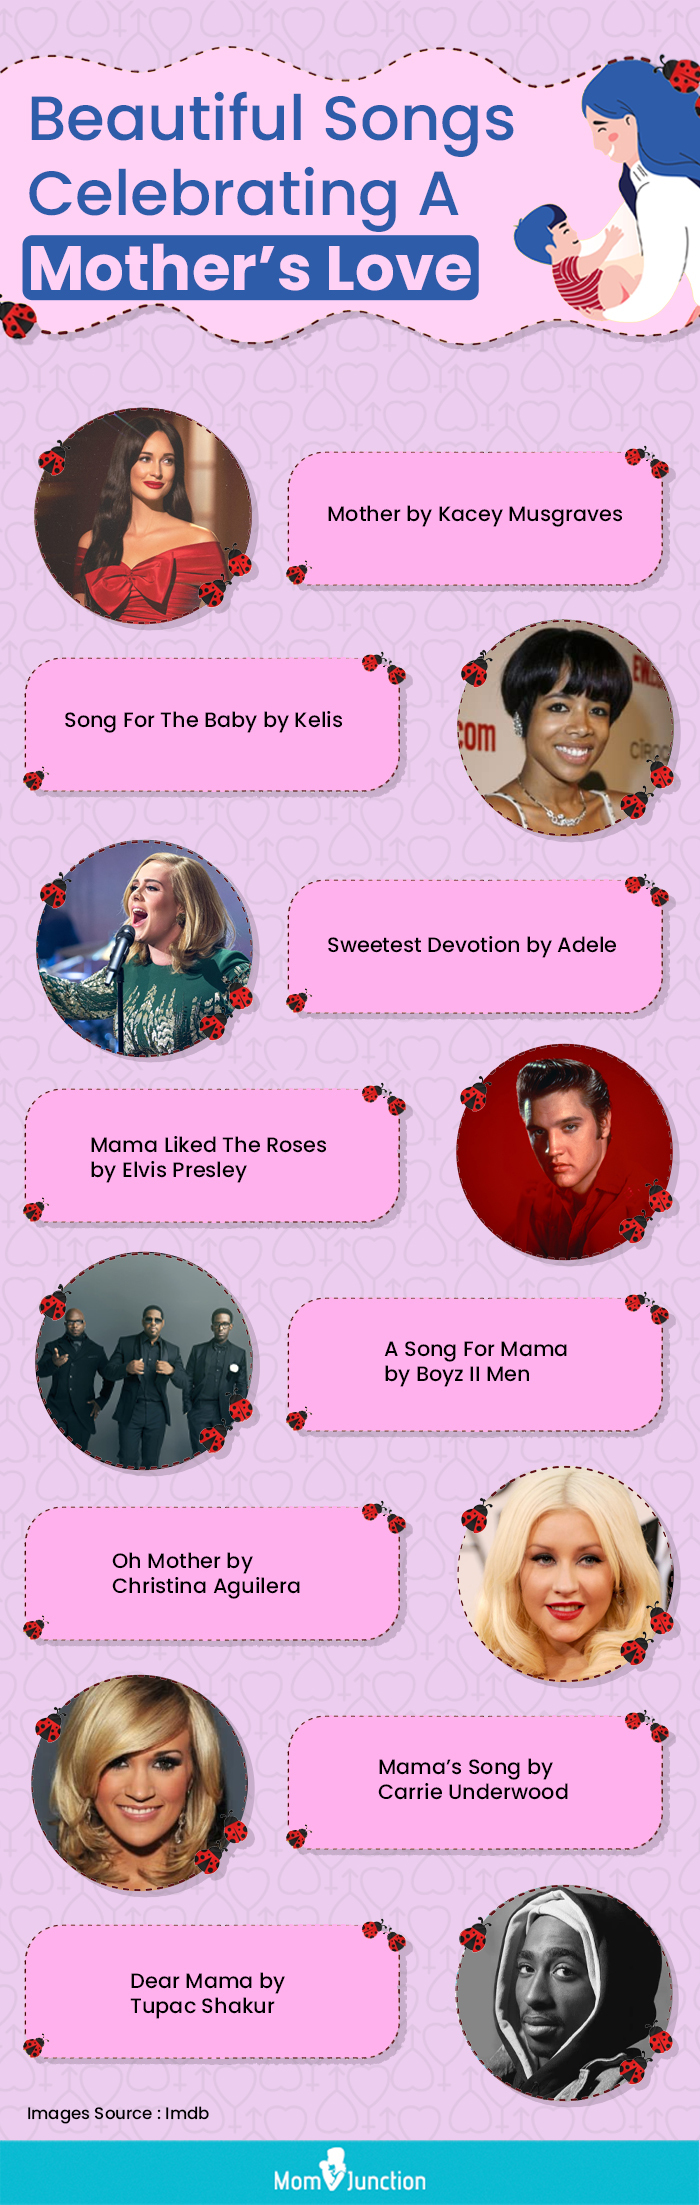 beautiful songs celebrating a mothers love (infographic)